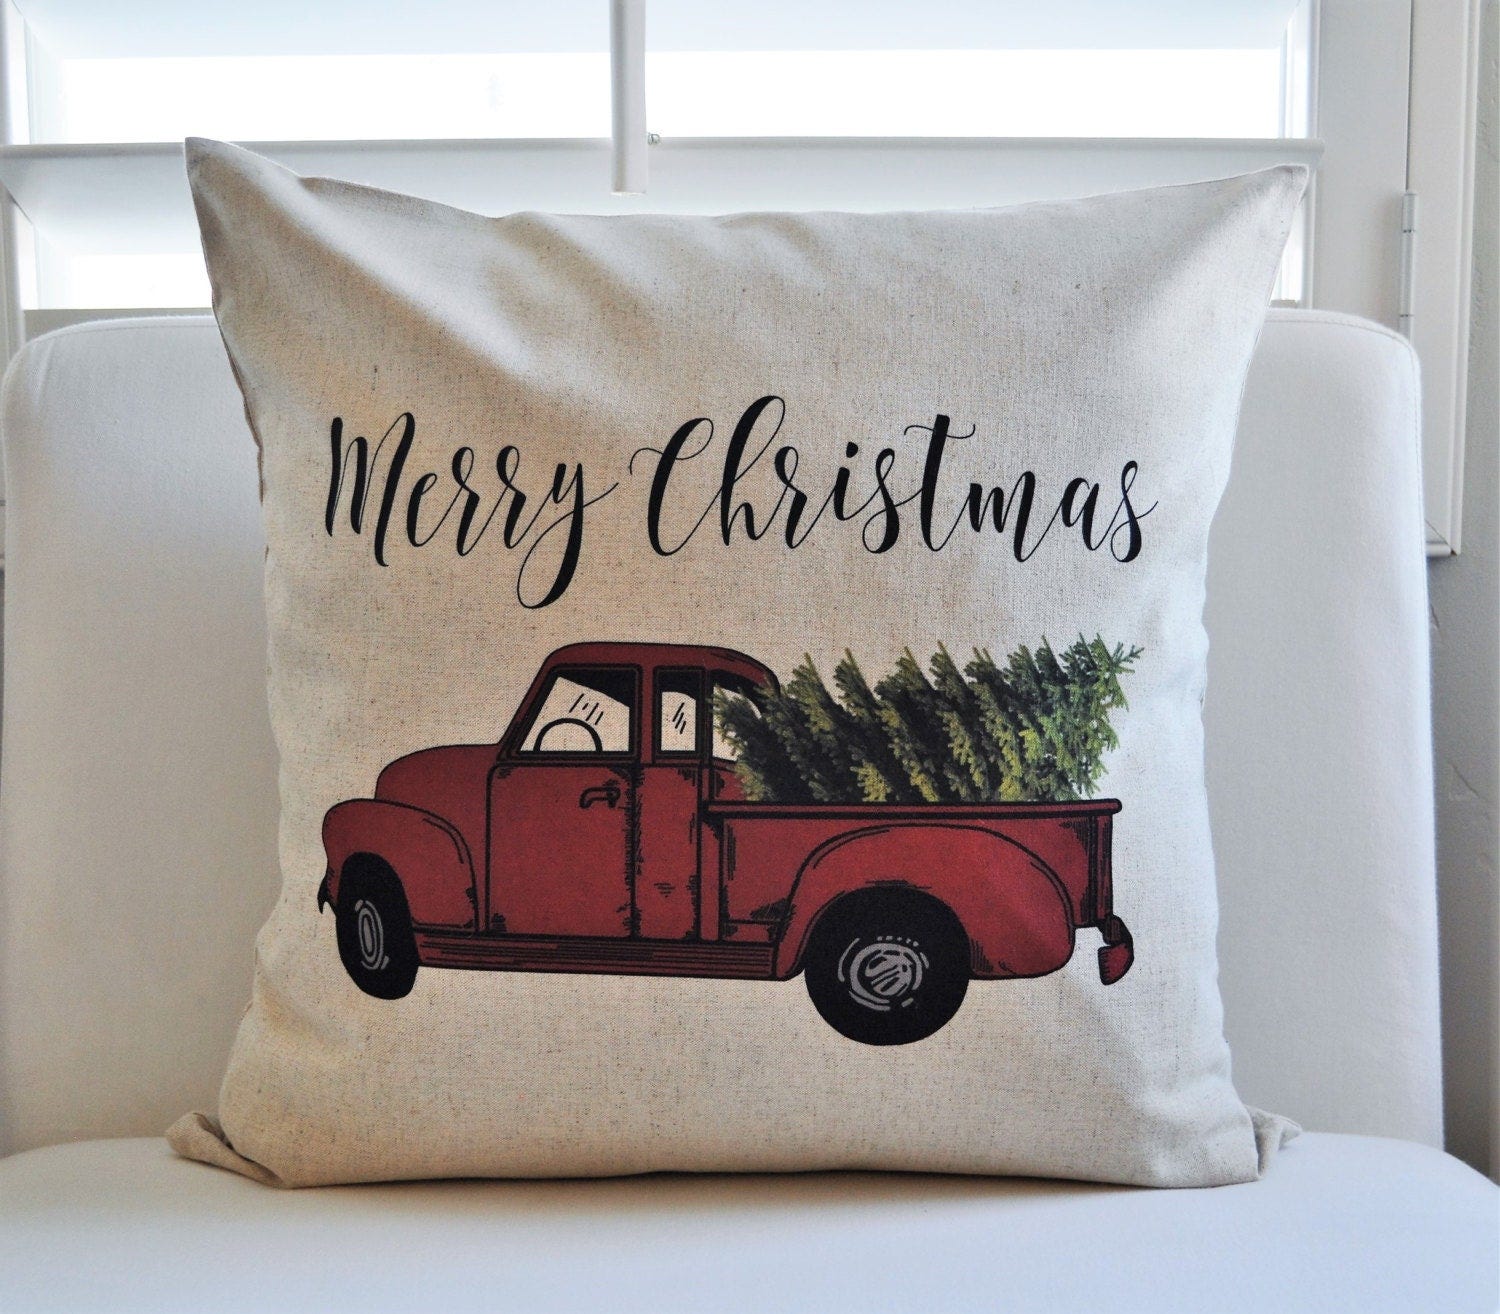 SALE,this weekend ONLY Christmas pillow cover, Christmas, Christmas Tree, Merry Christmas pillow, Vintage christmas,  red Christmas truck